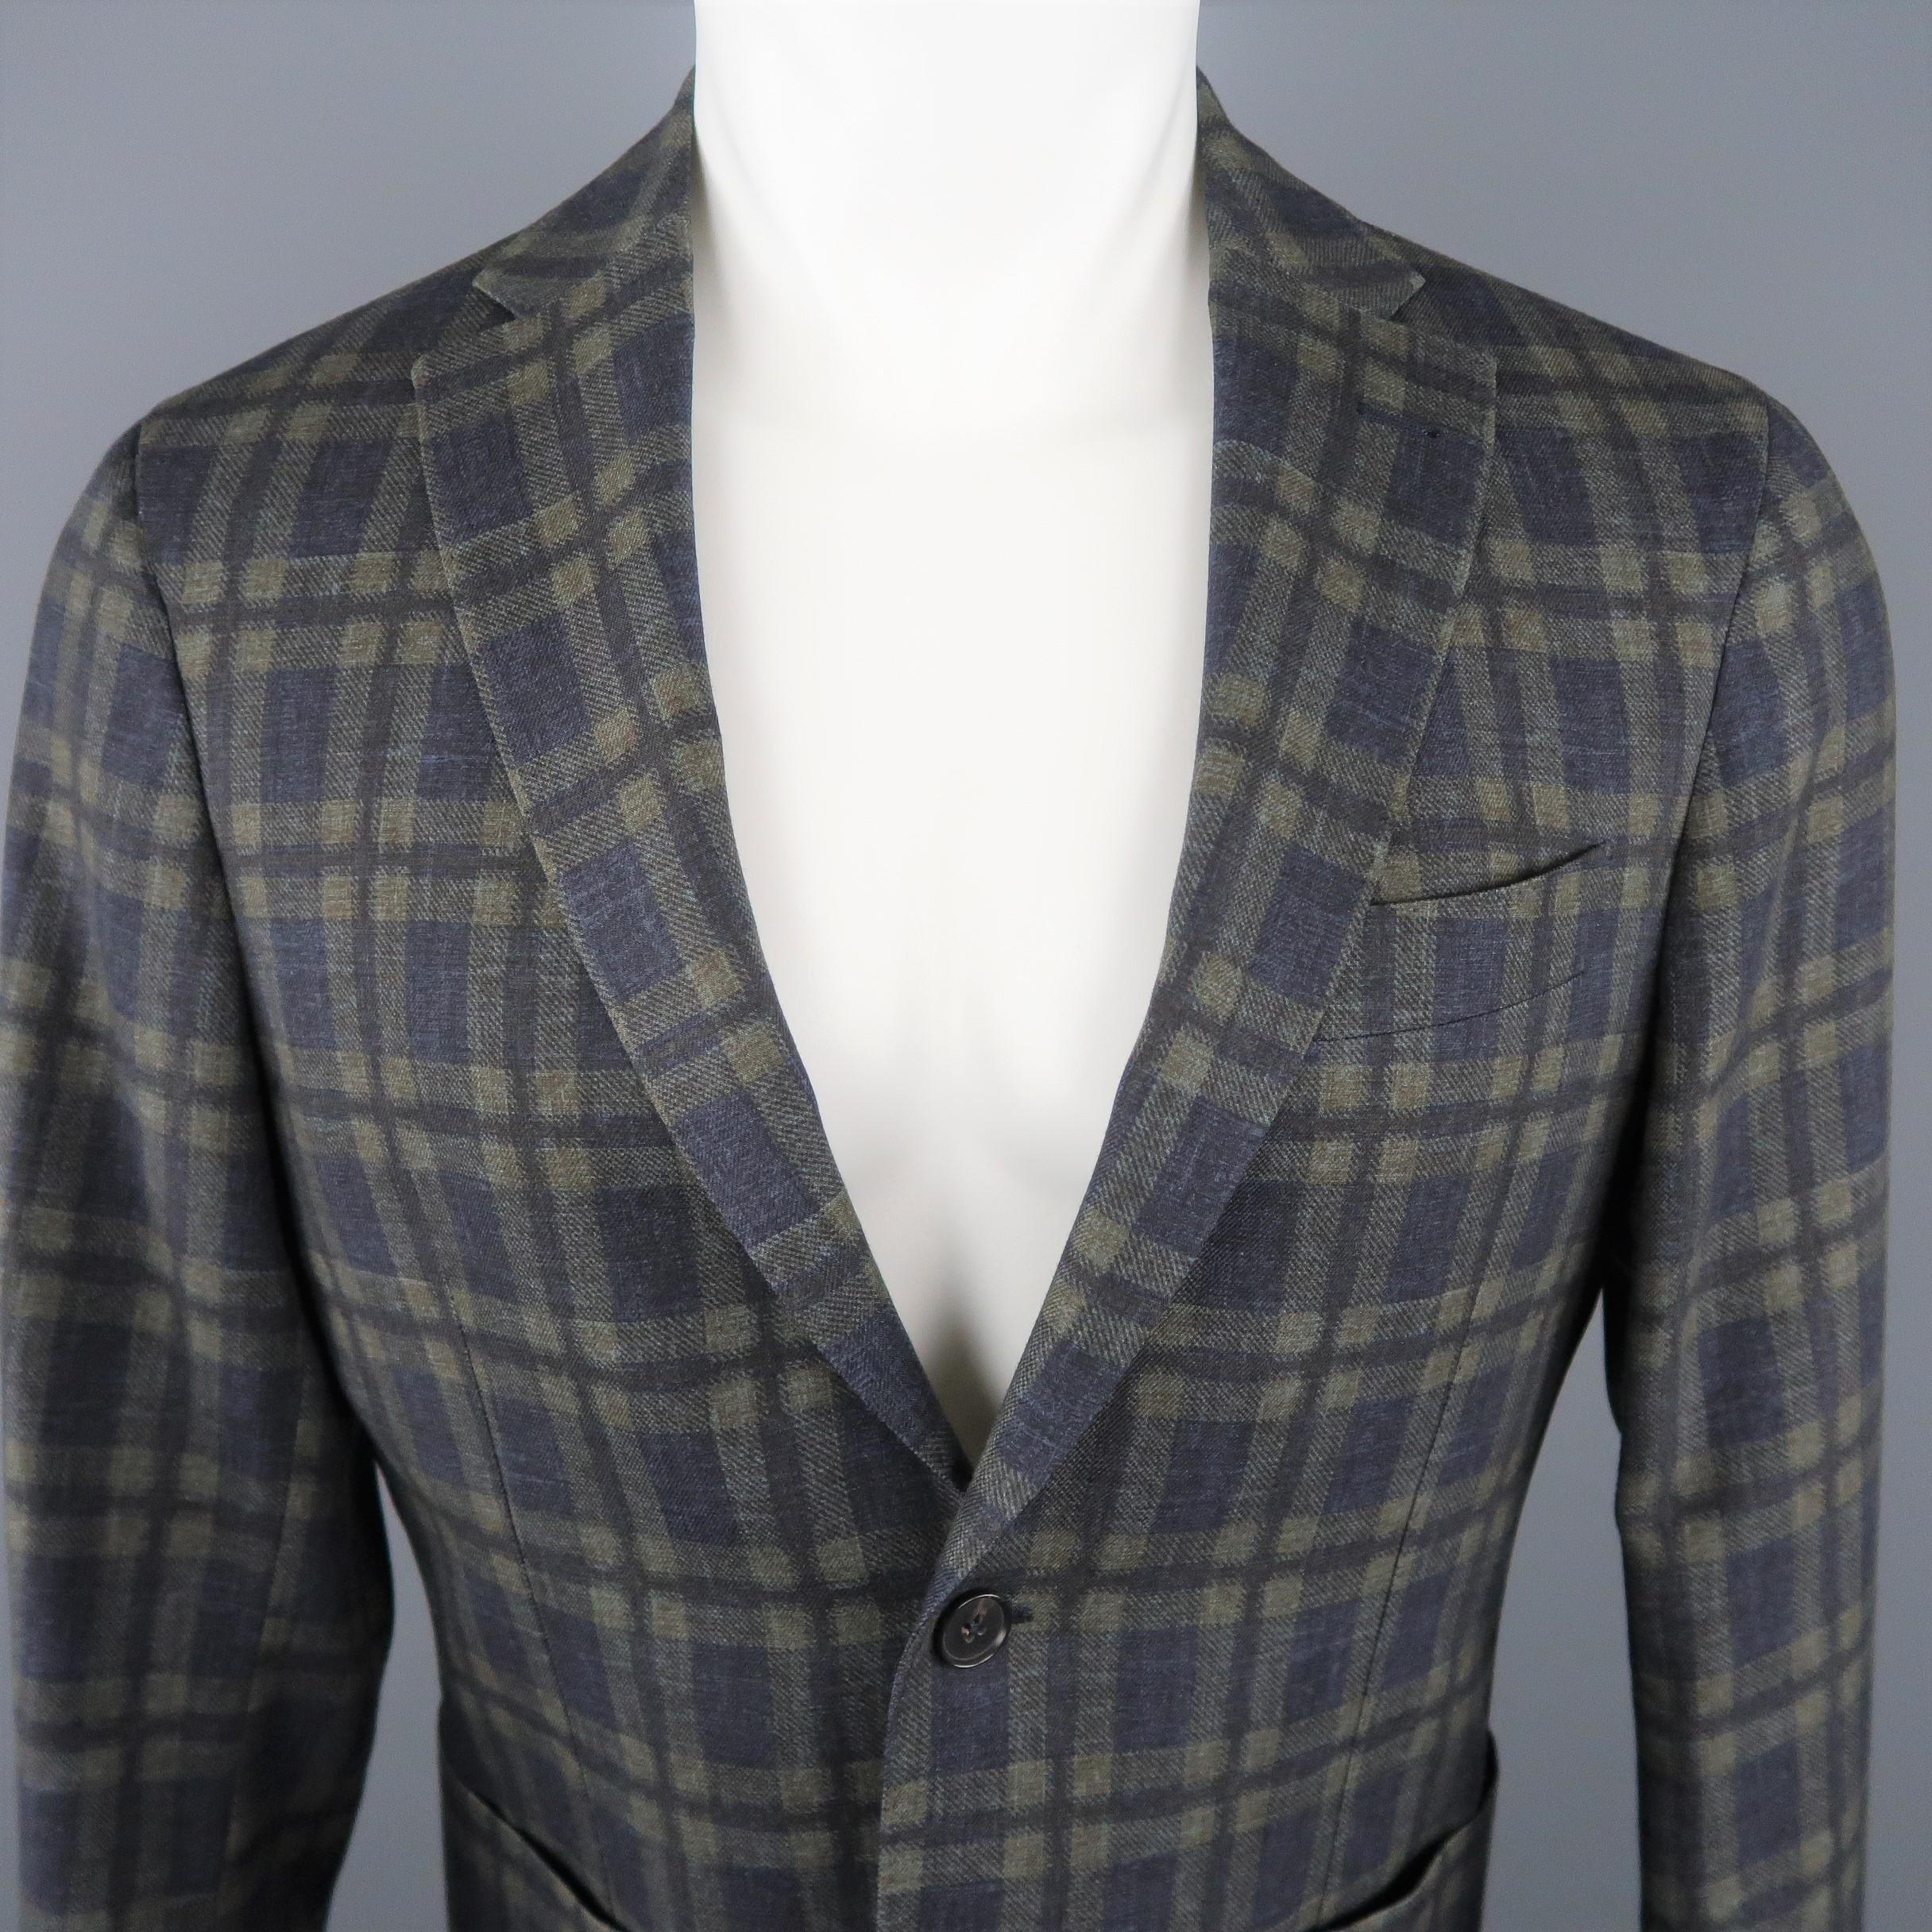 SAKS FIFTH AVENUE Sport Coat comes in a charcoal tone in a plaid wool material, with a notch lapel, slit and patch pockets, 2 buttons at closure, single breasted, functional buttons at cuffs and double vent at back. Made in Italy.
 
Excellent